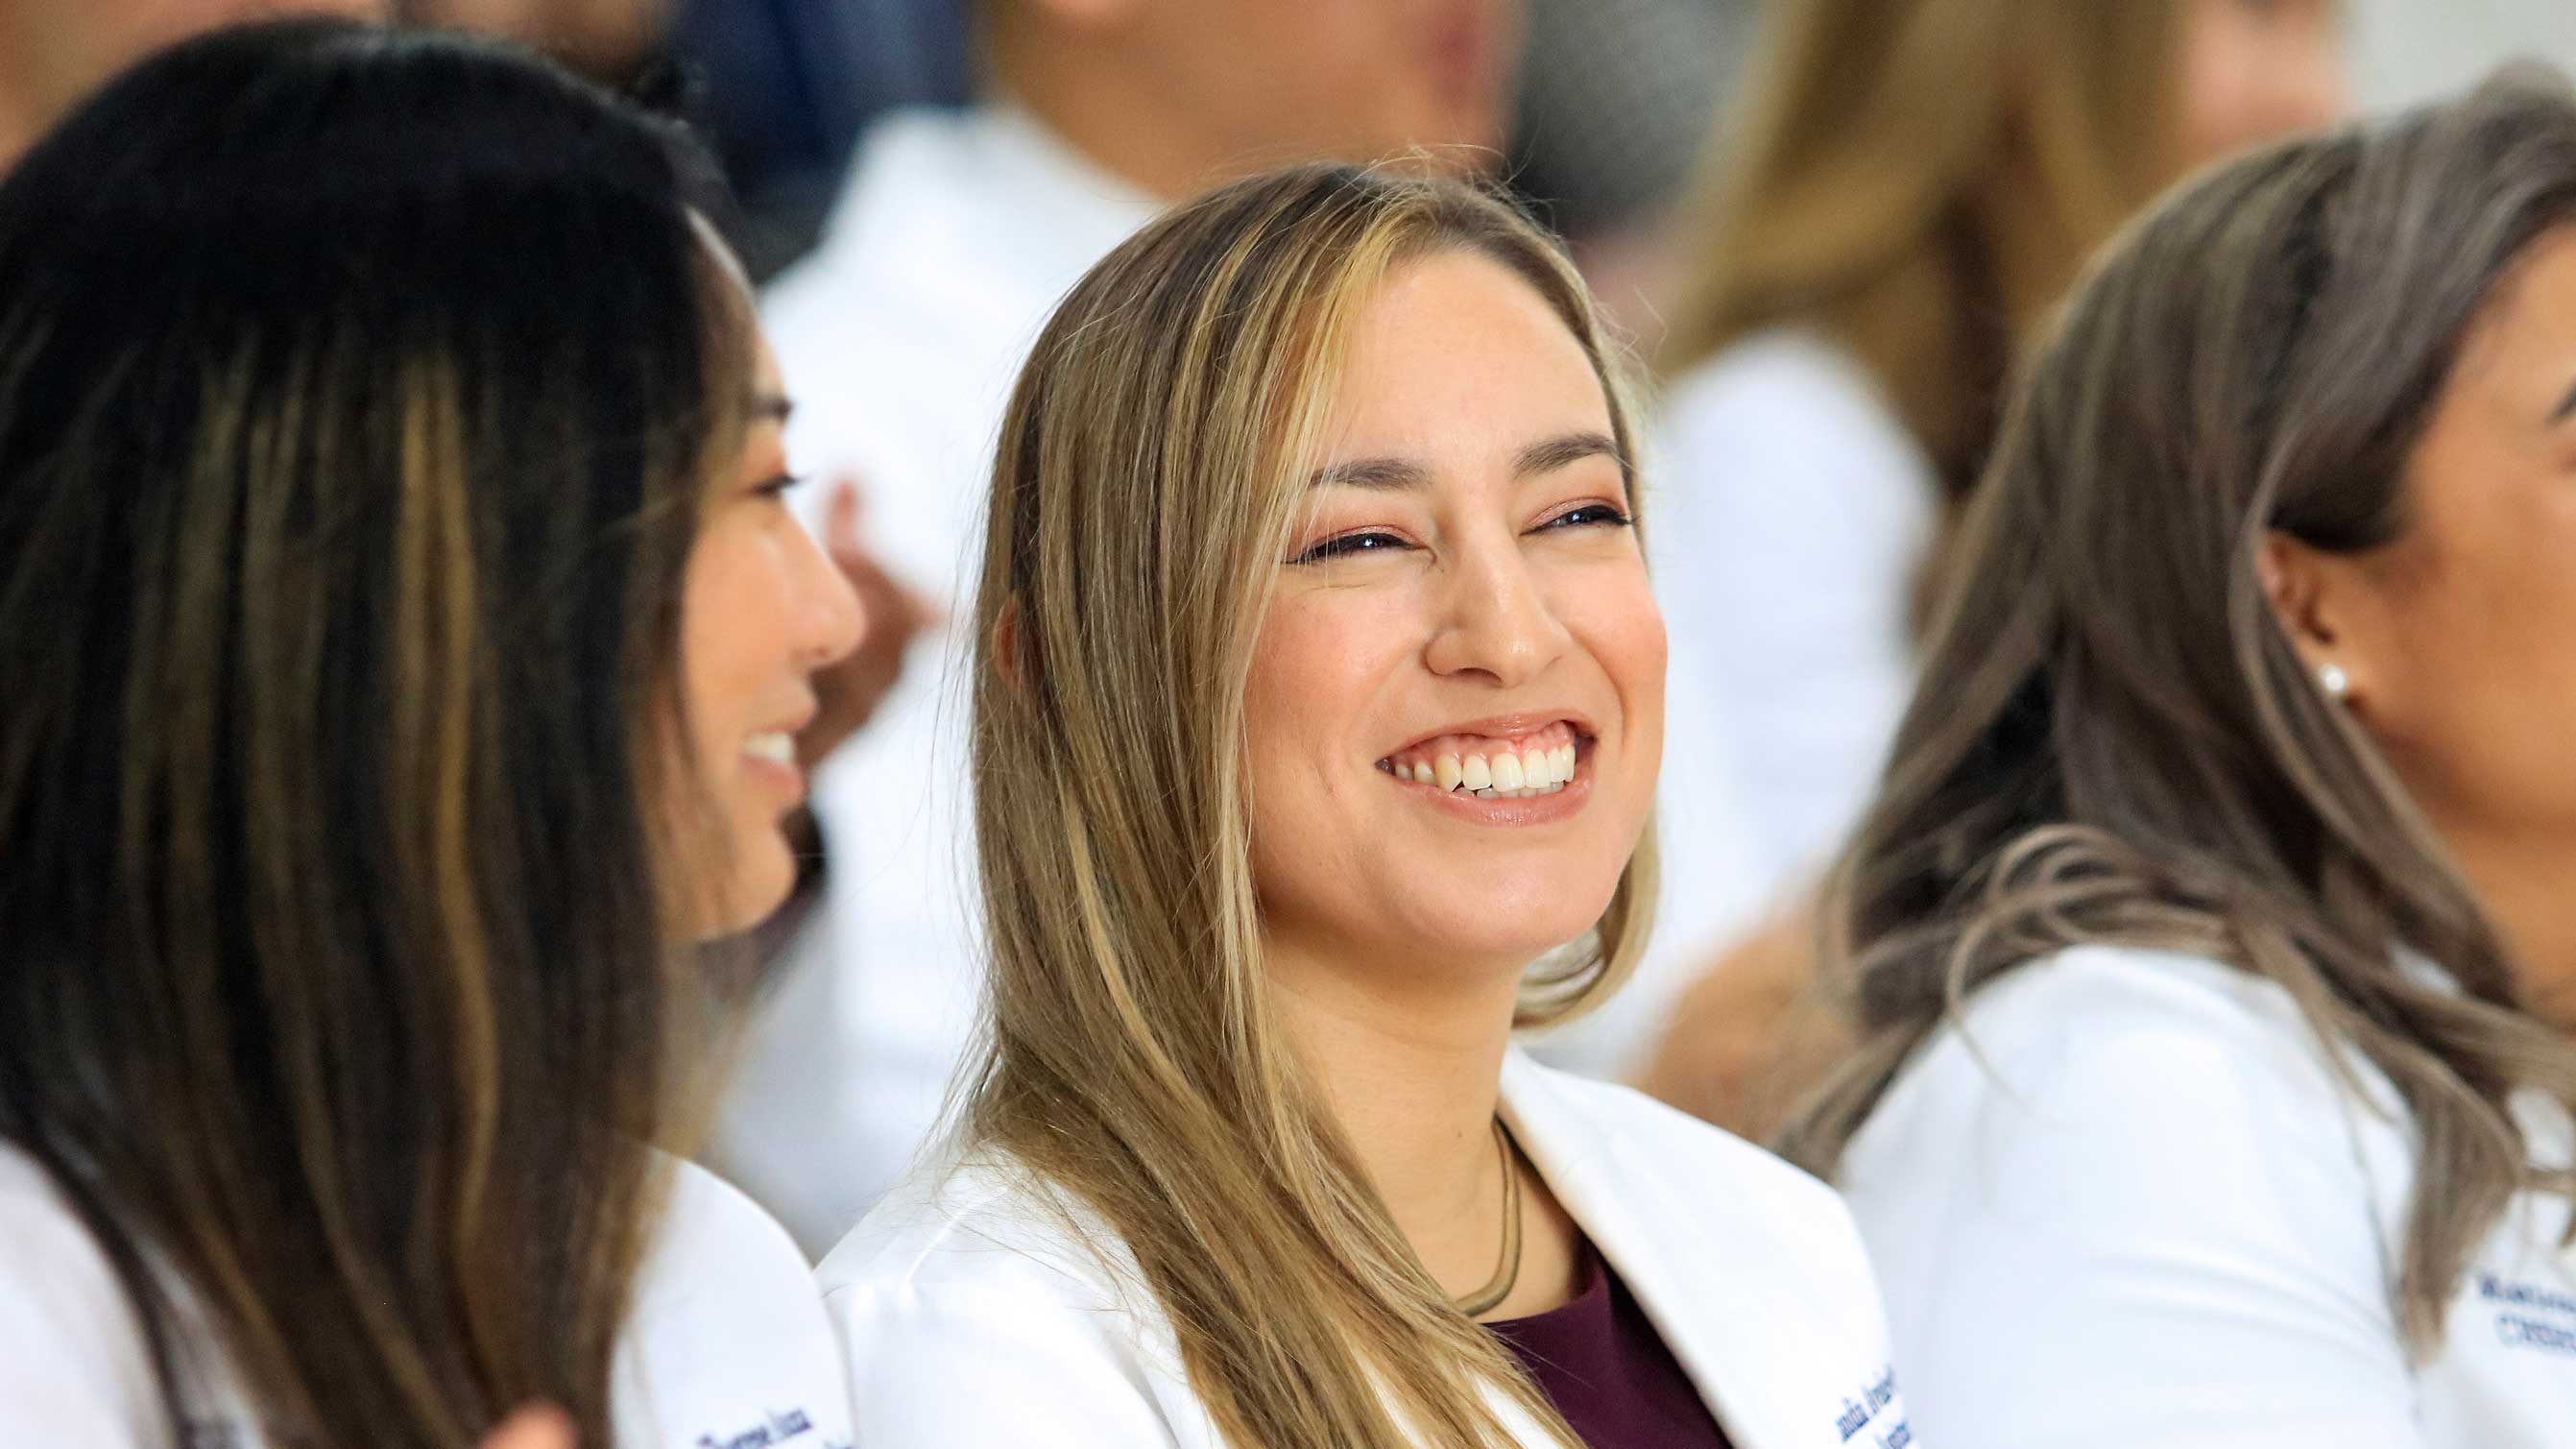 MSPA student smiling during the White Coat Ceremony